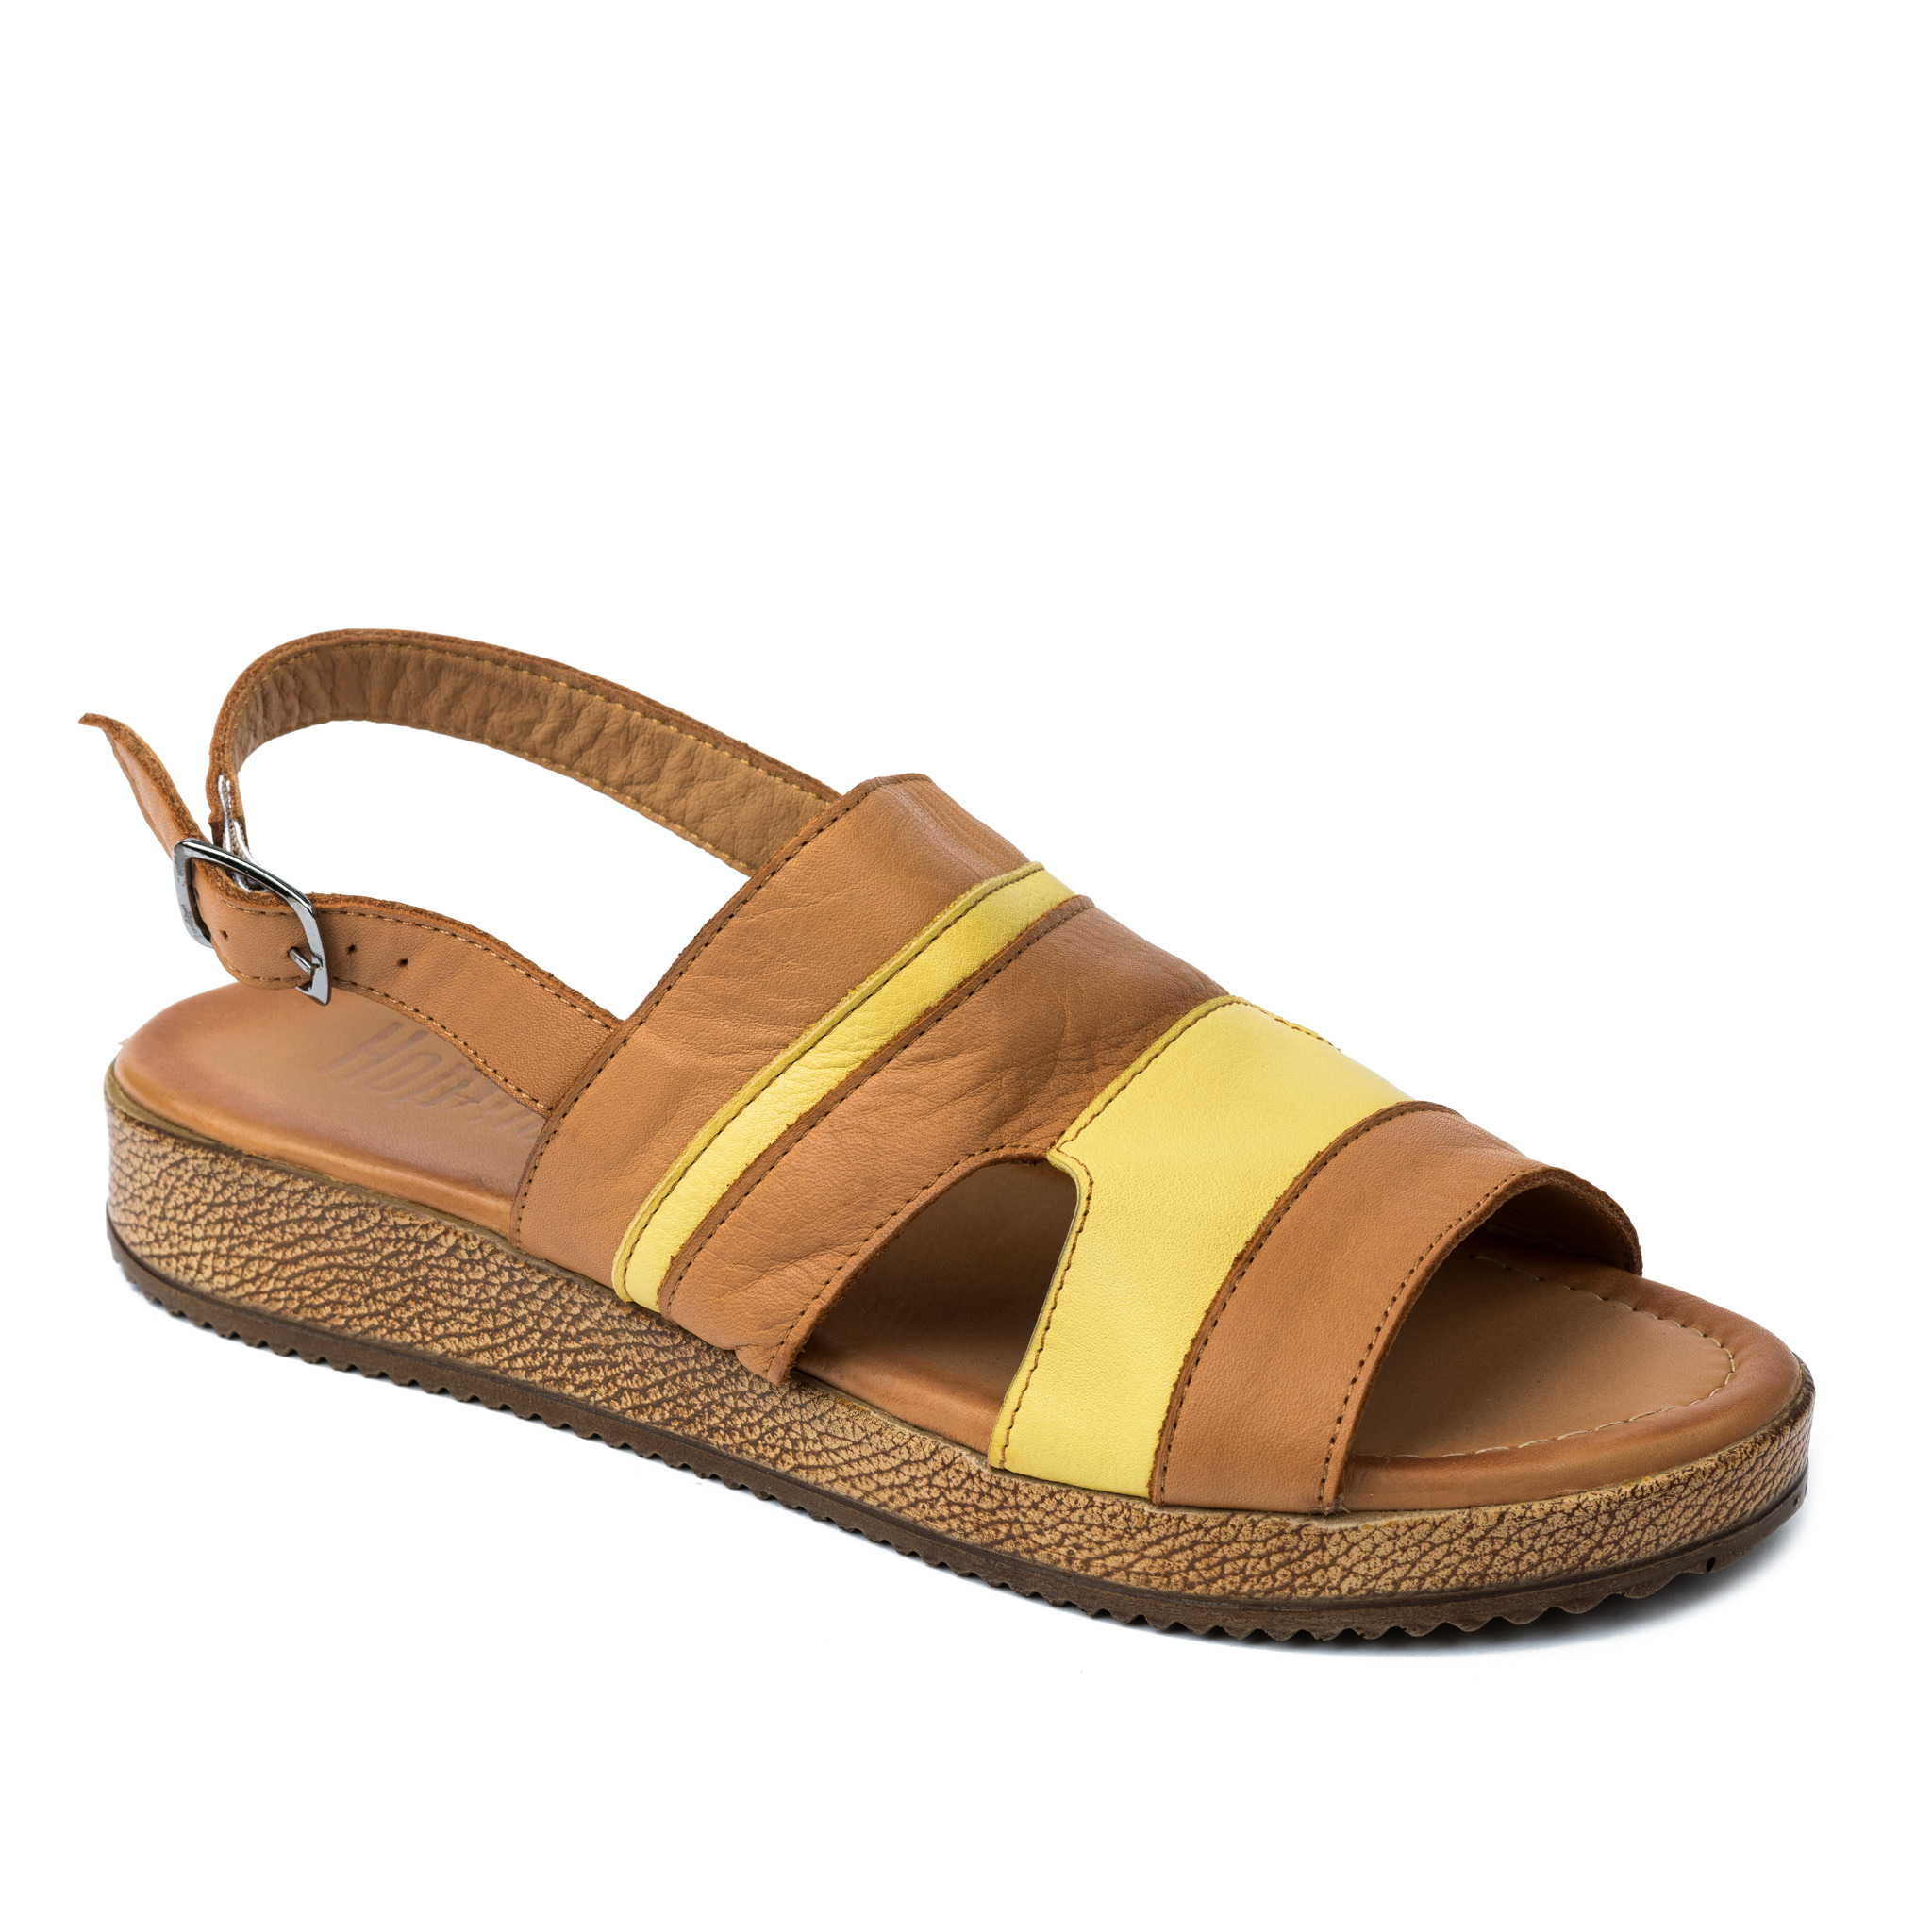 Leather sandals A699 - YELLOW